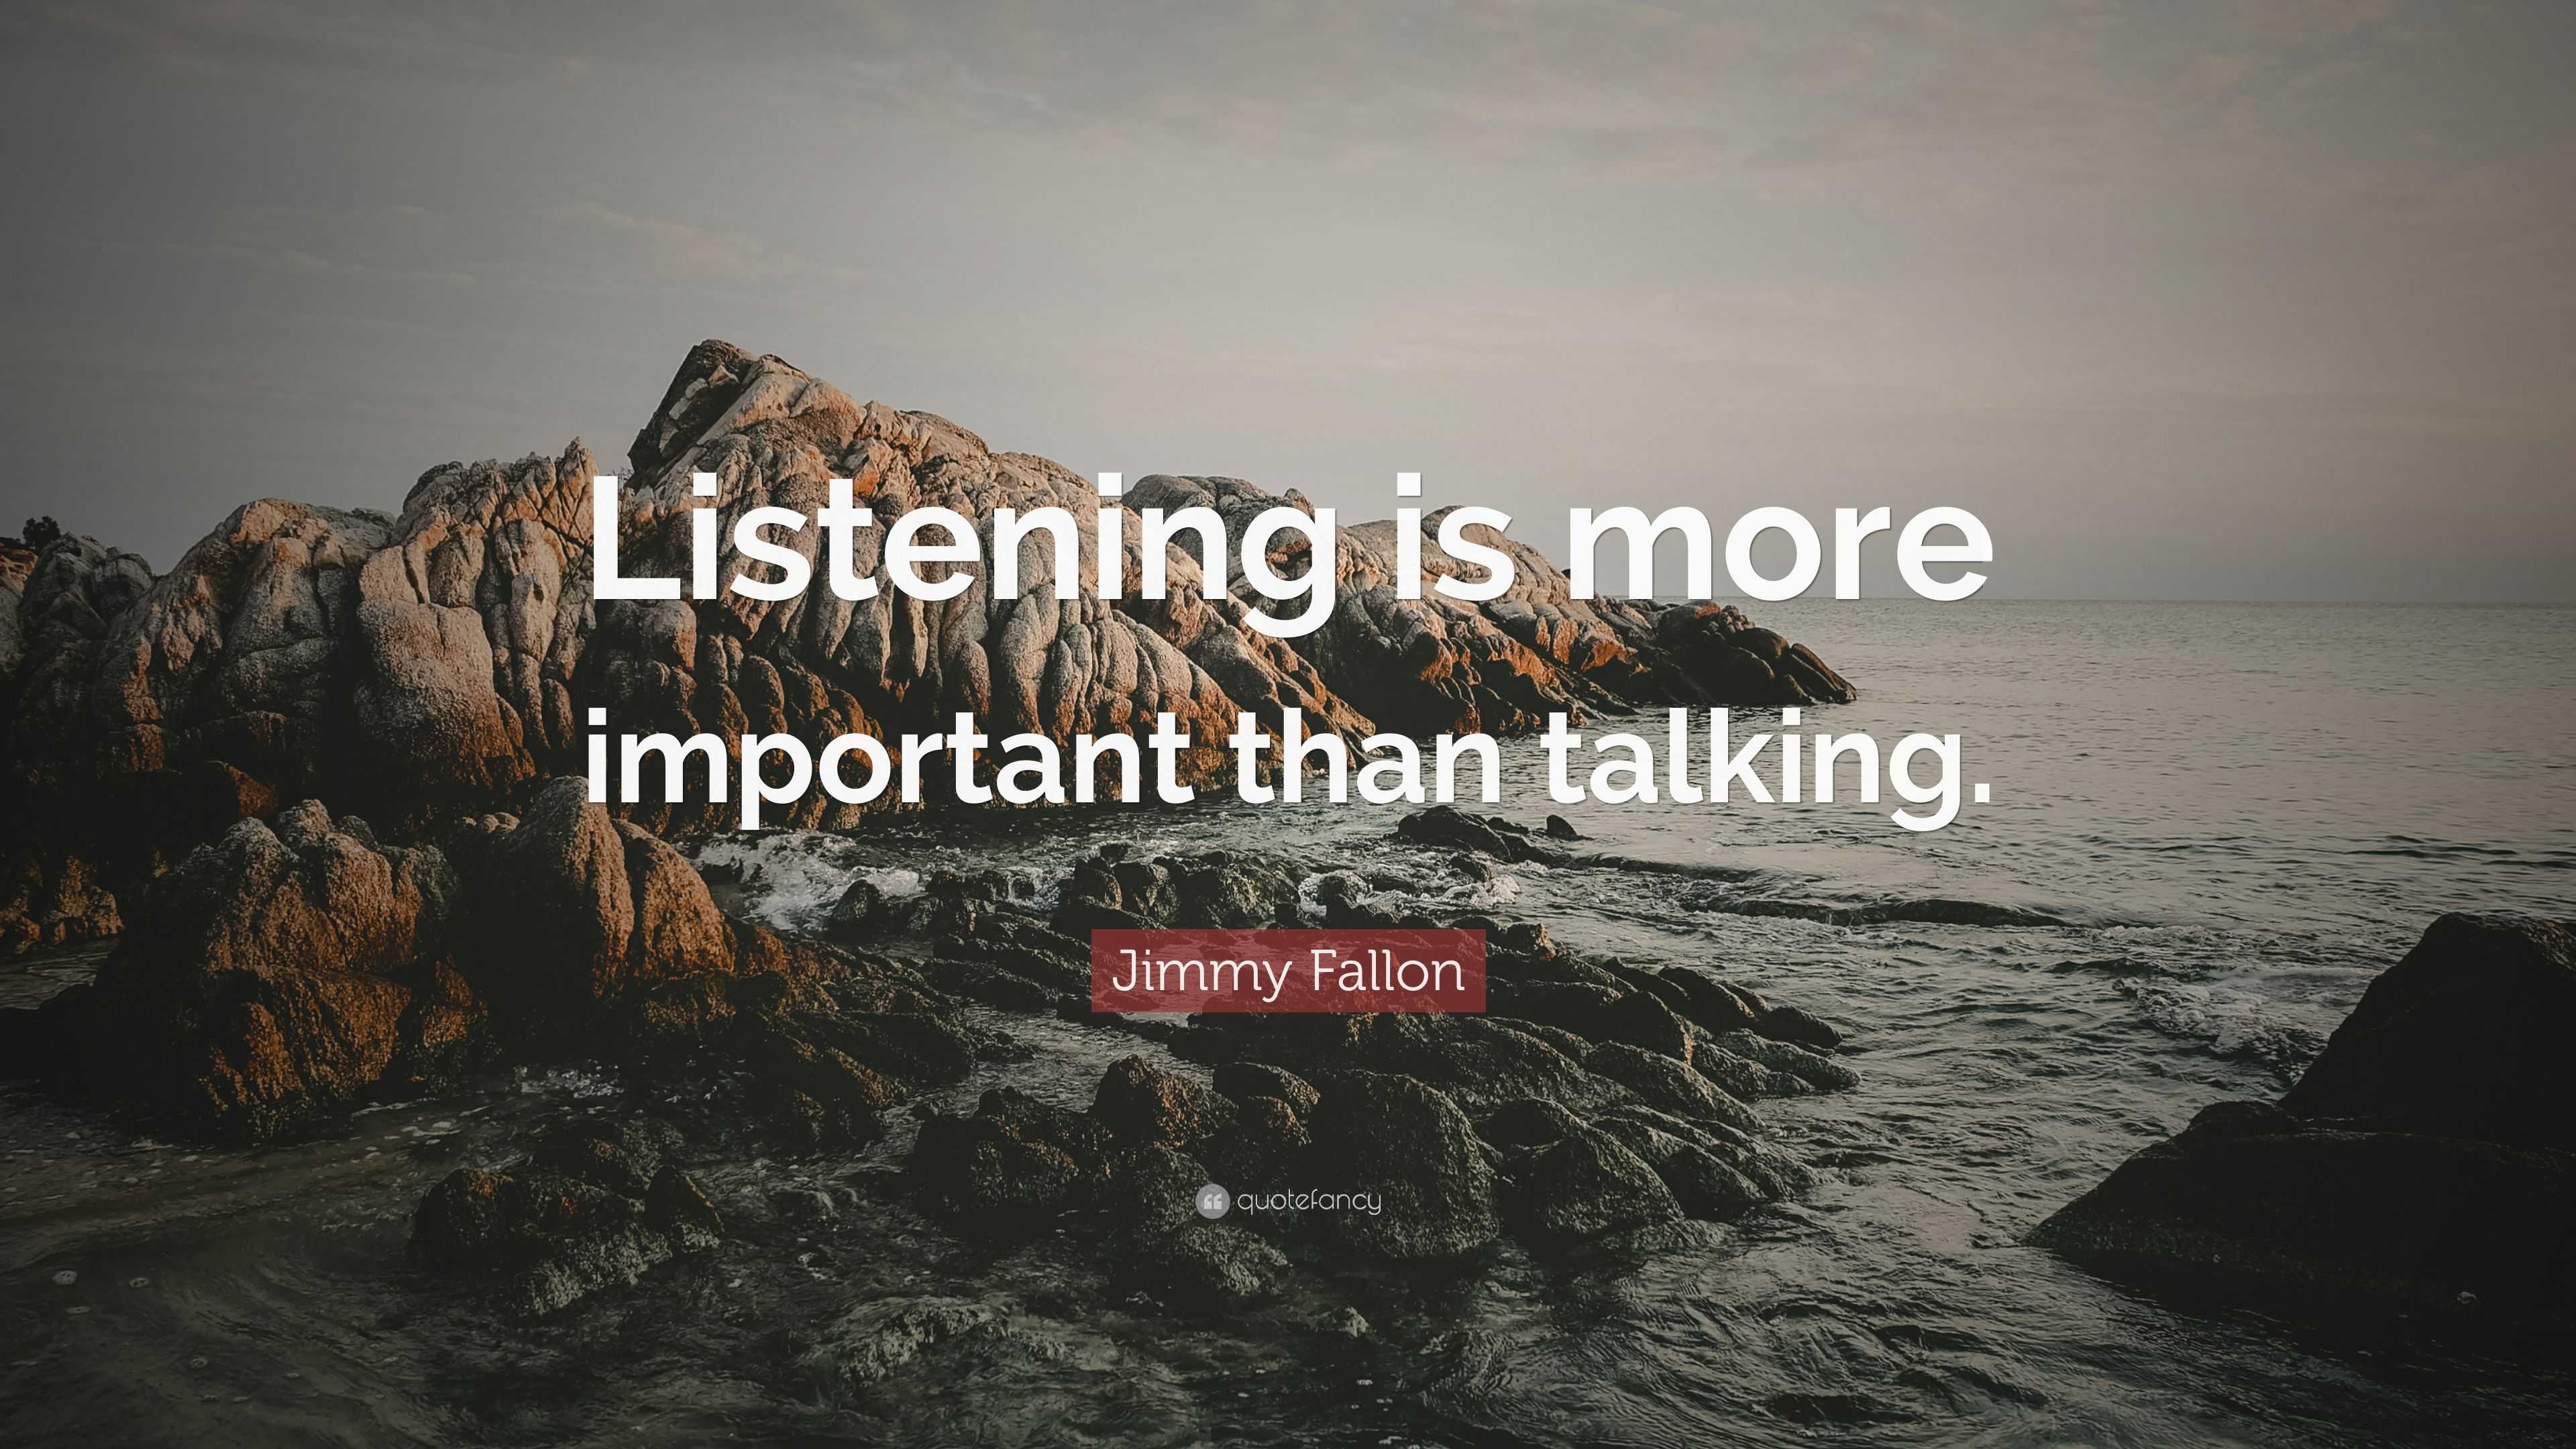 Jimmy Fallon Quote: “Listening is more important than talking.”